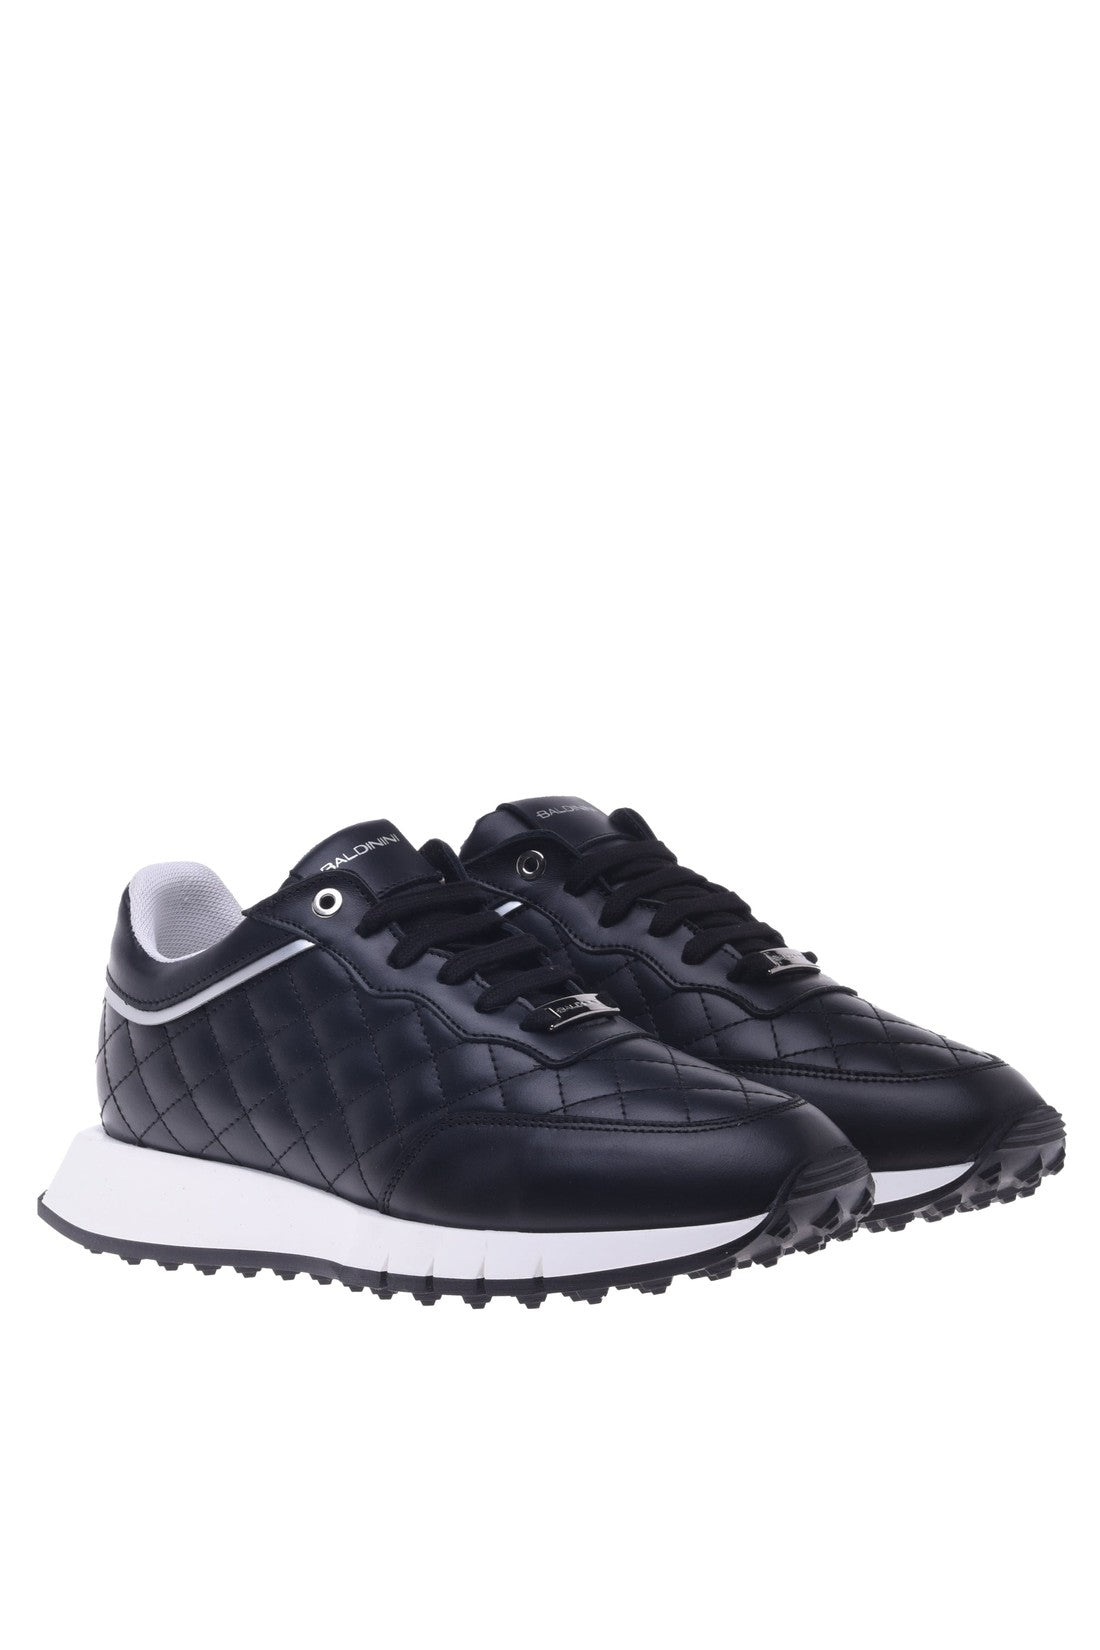 BALDININI-OUTLET-SALE-Sneaker-in-black-quilted-leather-Sneaker-ARCHIVE-COLLECTION-3.jpg